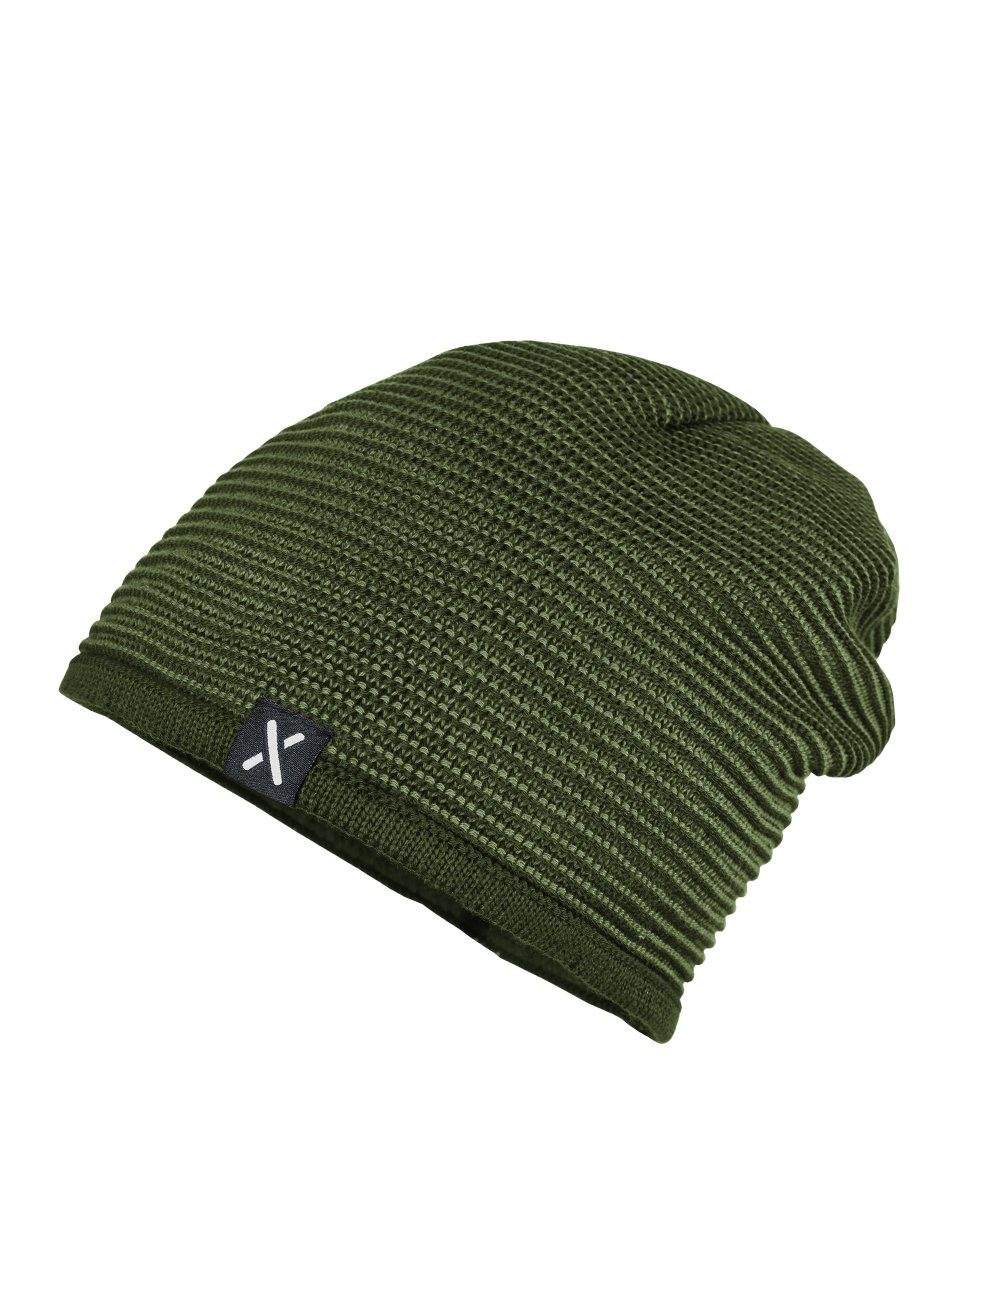 MAXIMO Strickmütze KIDS-Beanie middle Made in Germany dunkelkhaki/chive